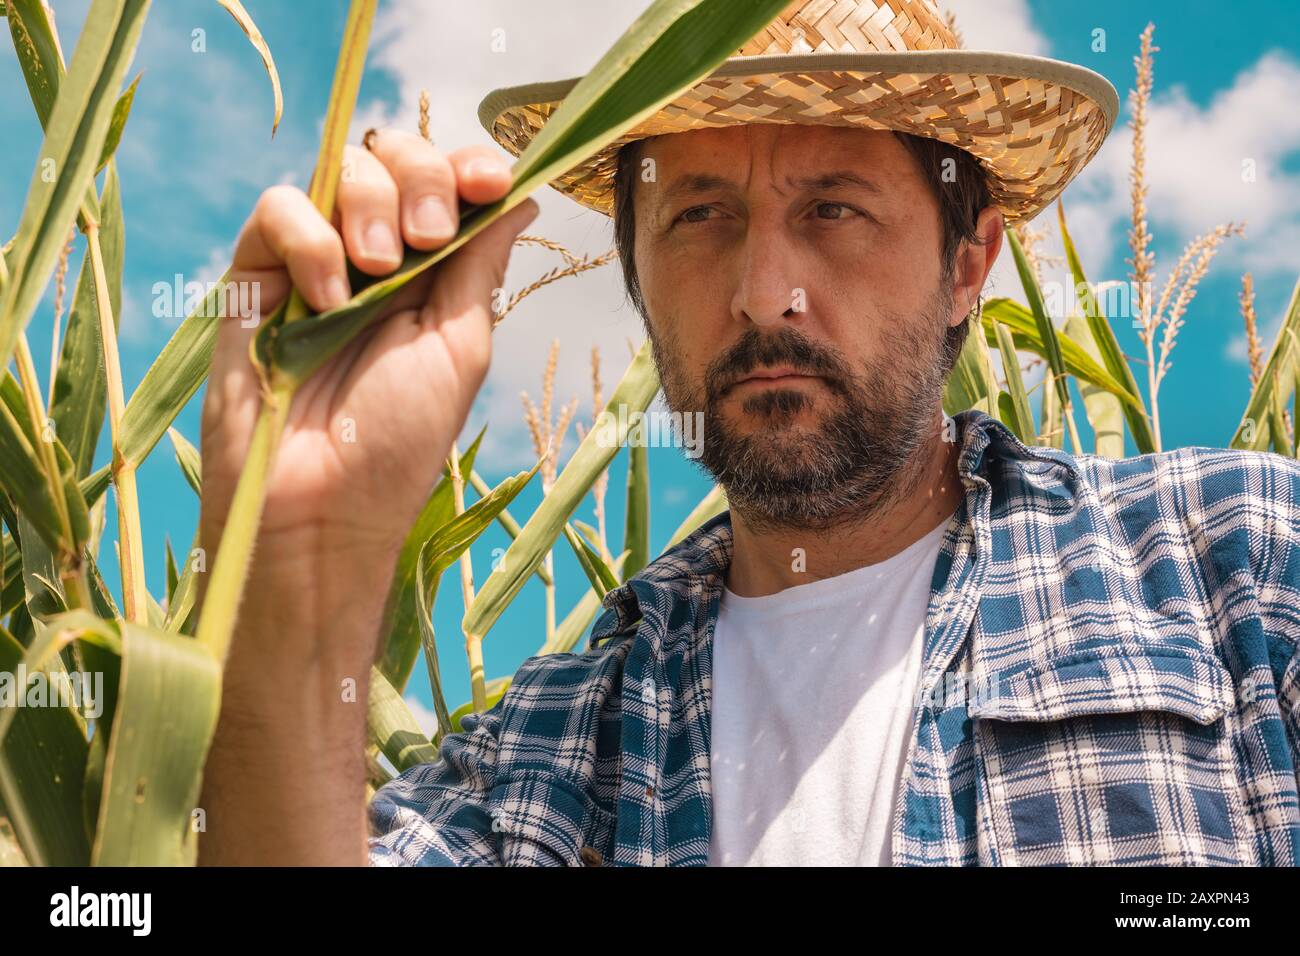 Farmer examining corn maize plants in field. Handsome adult agronomist is inspecting development of crops on cultivated plantation. Stock Photo